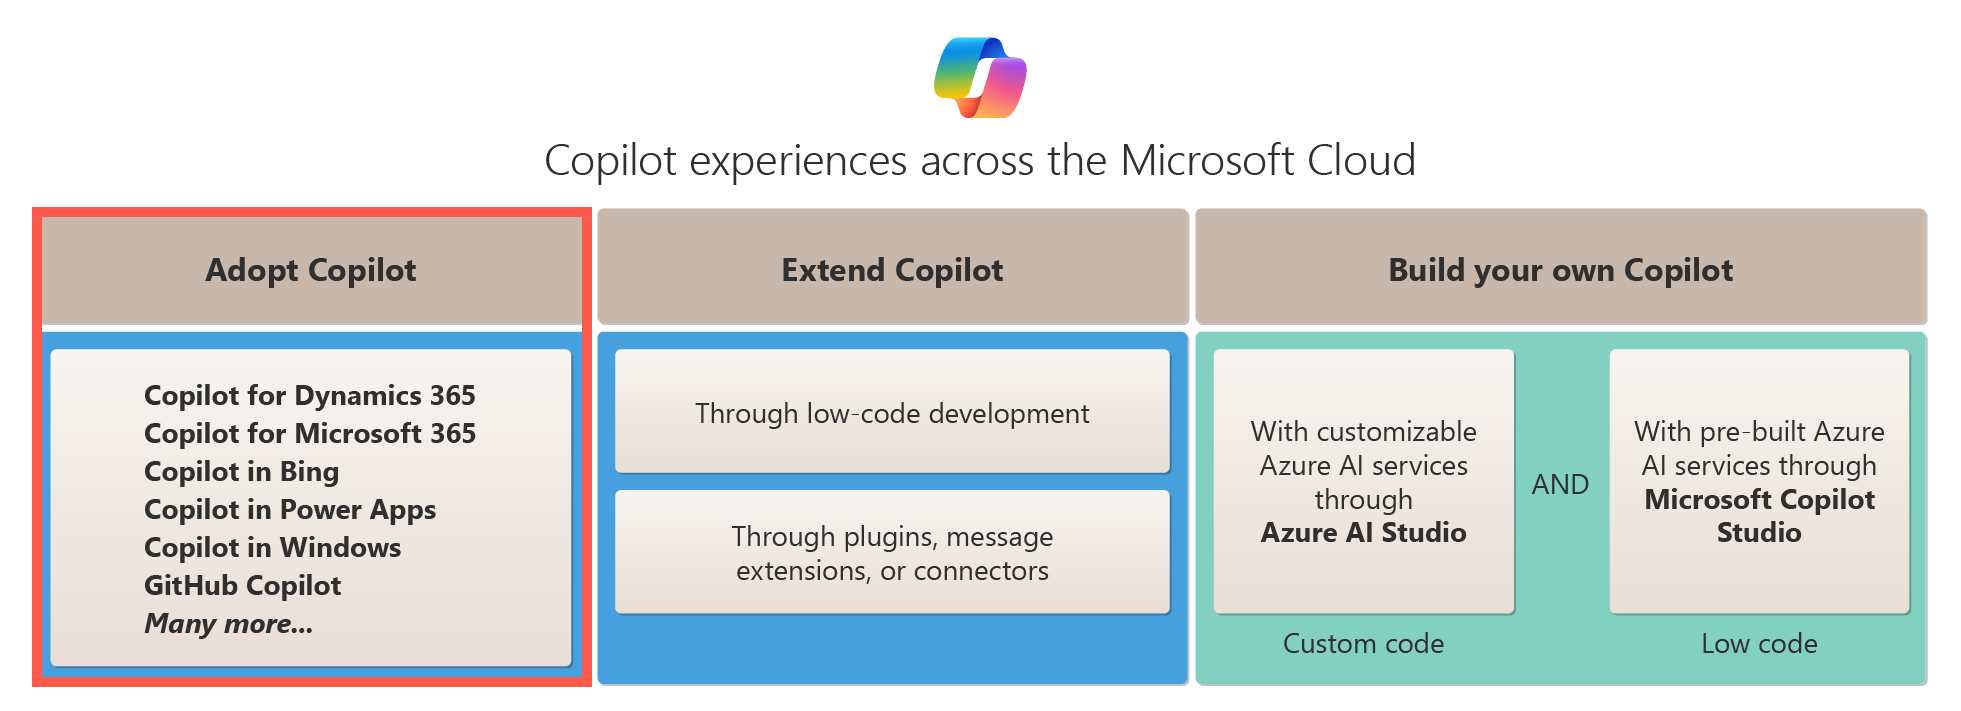 A diagram showing the adopt options for a Copilot across the Microsoft Cloud.